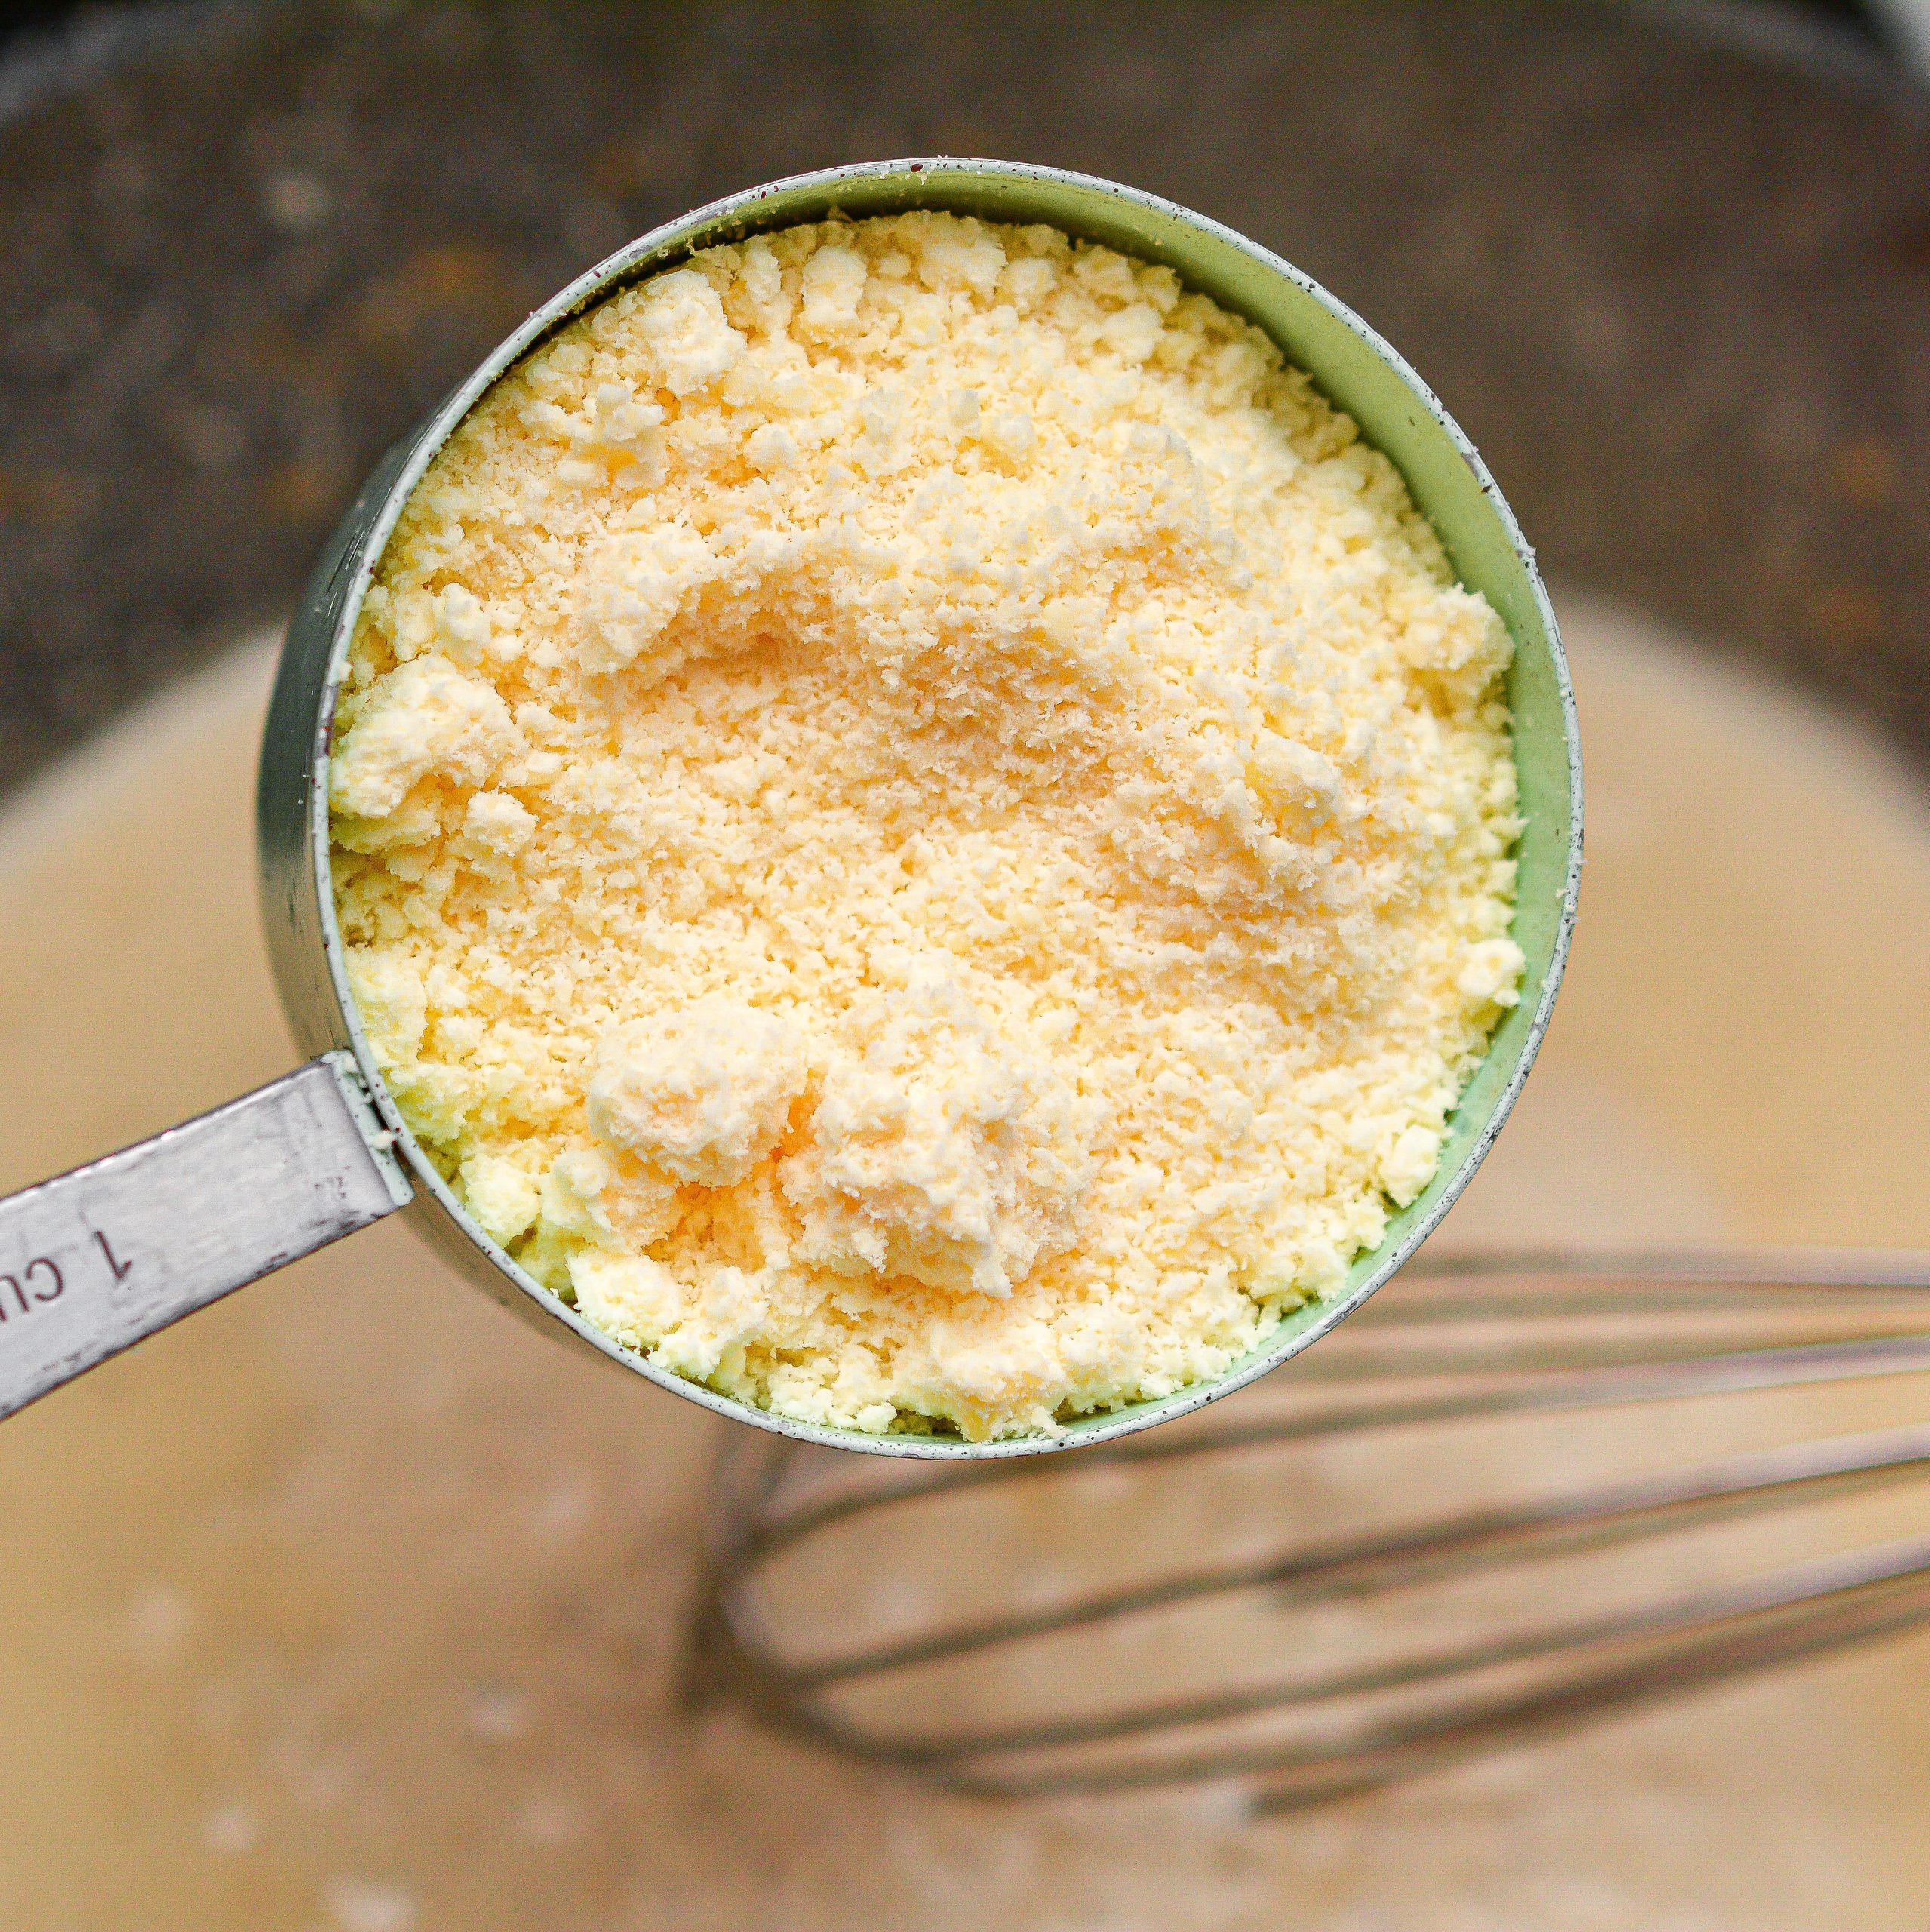 Stir in the Parmesan cheese until melted.